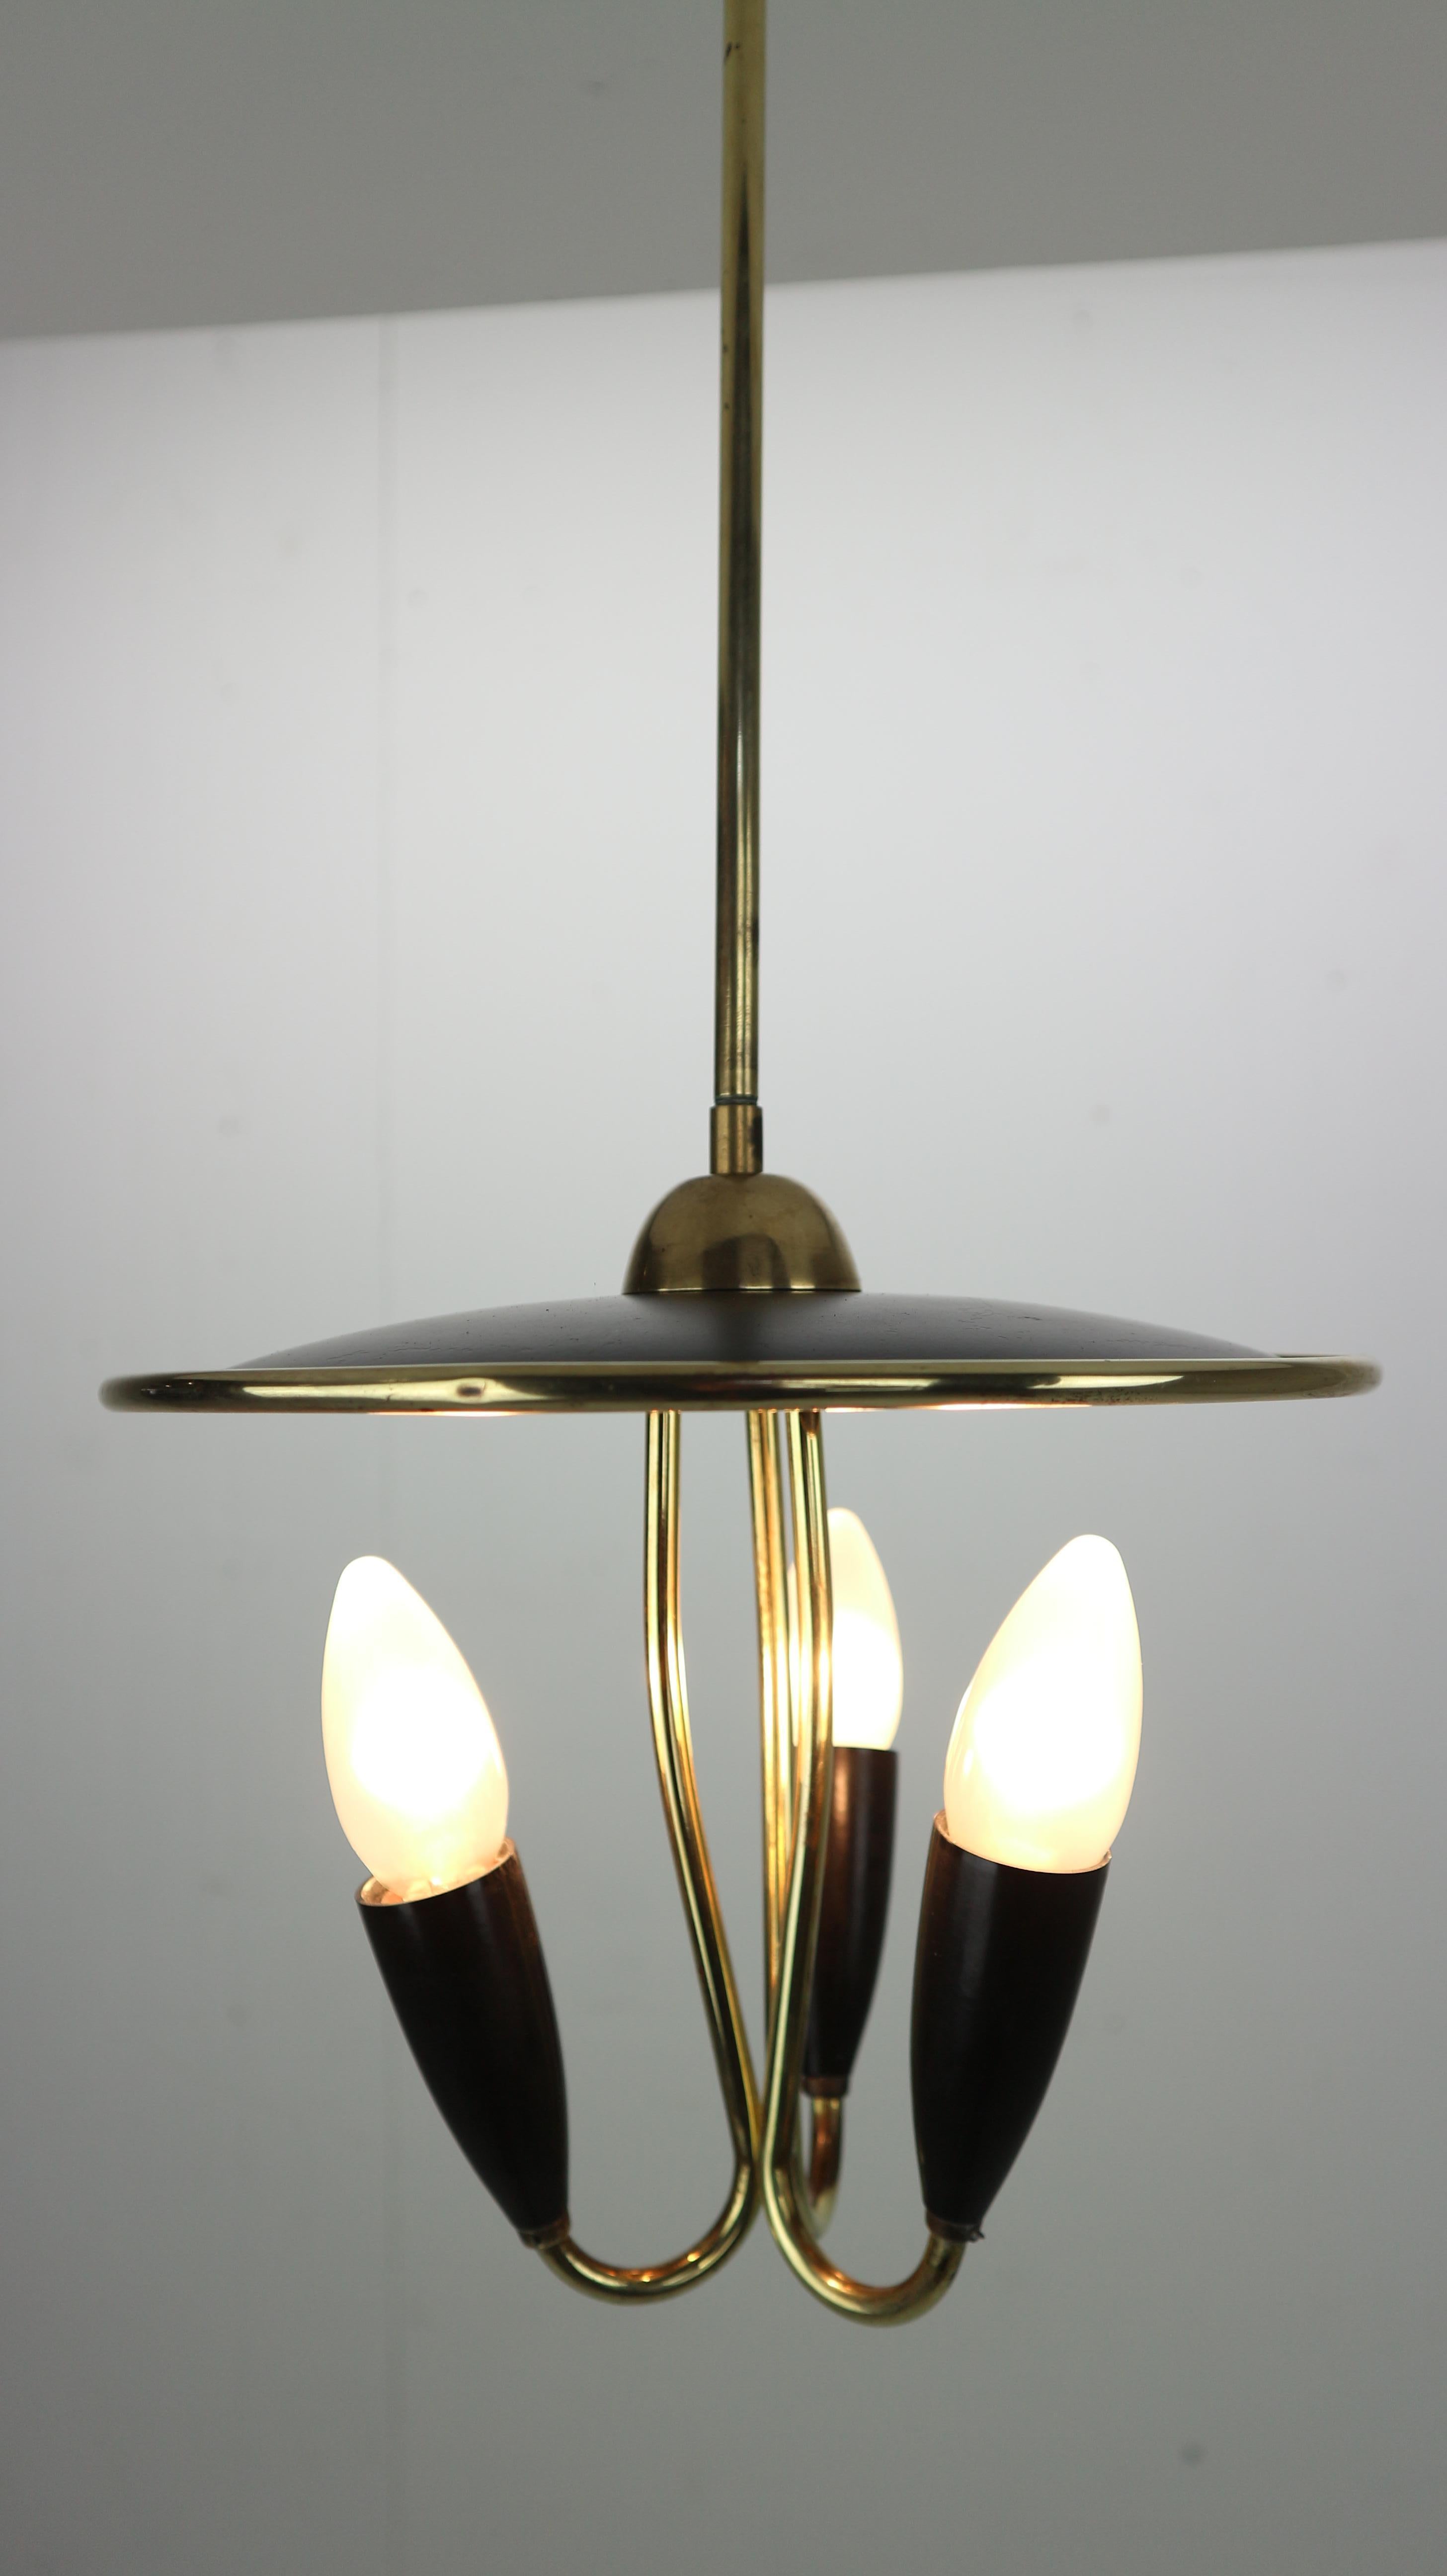 Mid-20th Century French Mid-Century Modern Brass and Black Metal Chandelier Lamp, 1950s